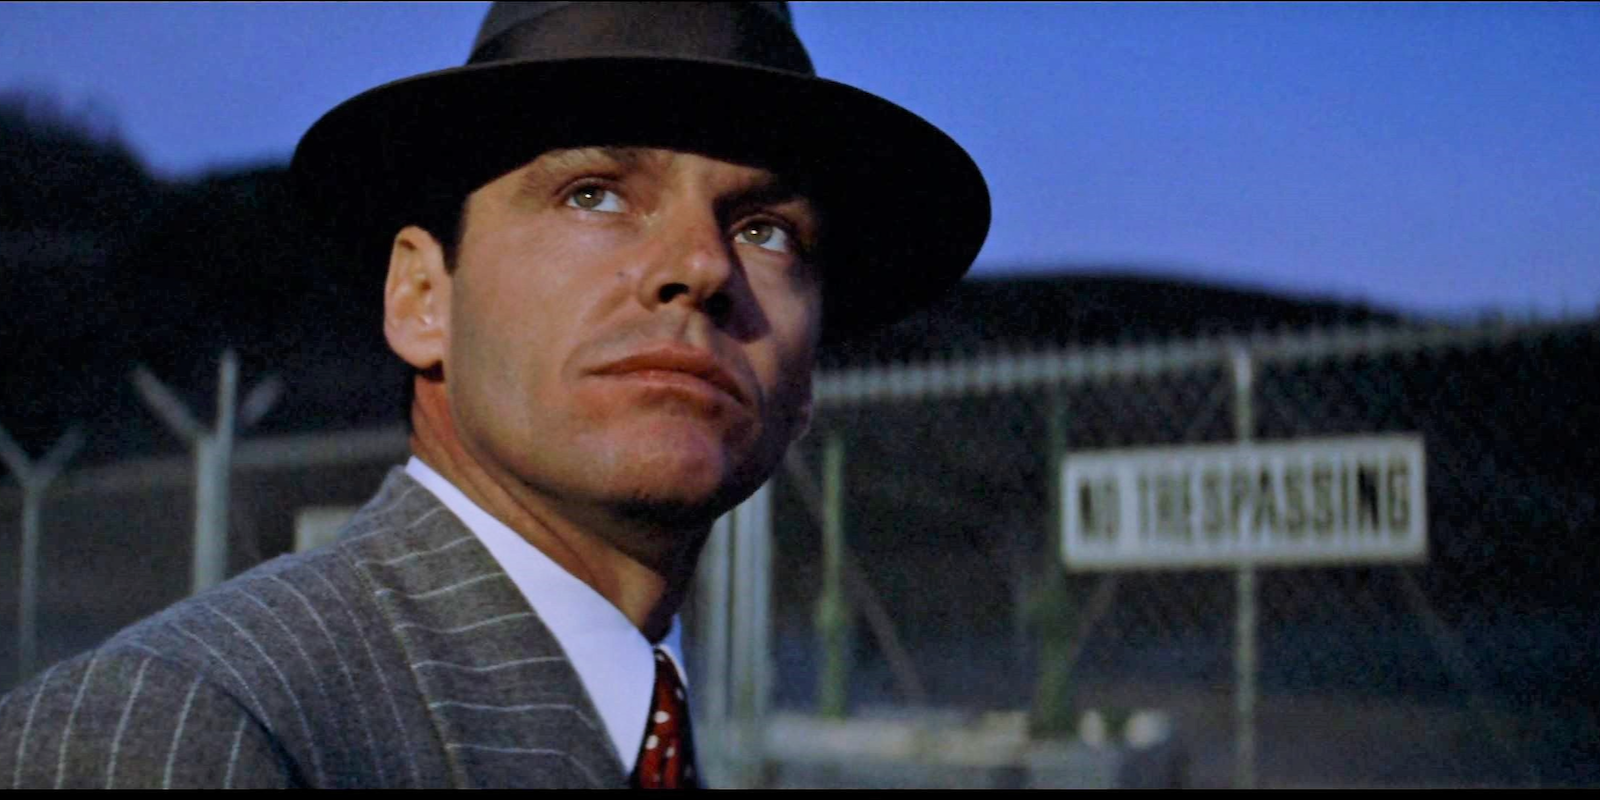 The Best Police & Detective Movies of All Time